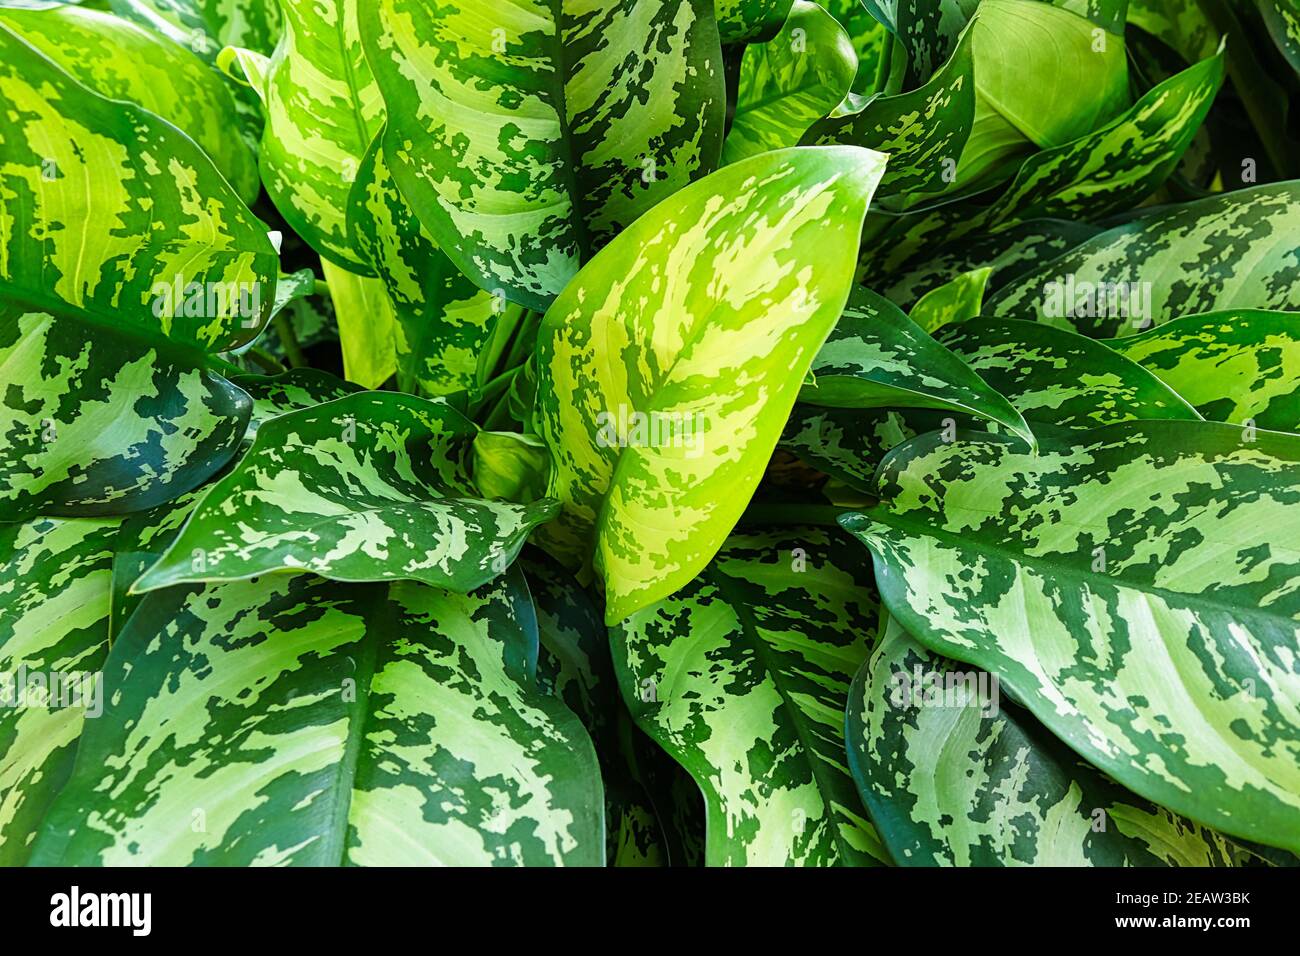 A background of Chinese Evergreen plant leaves Stock Photo